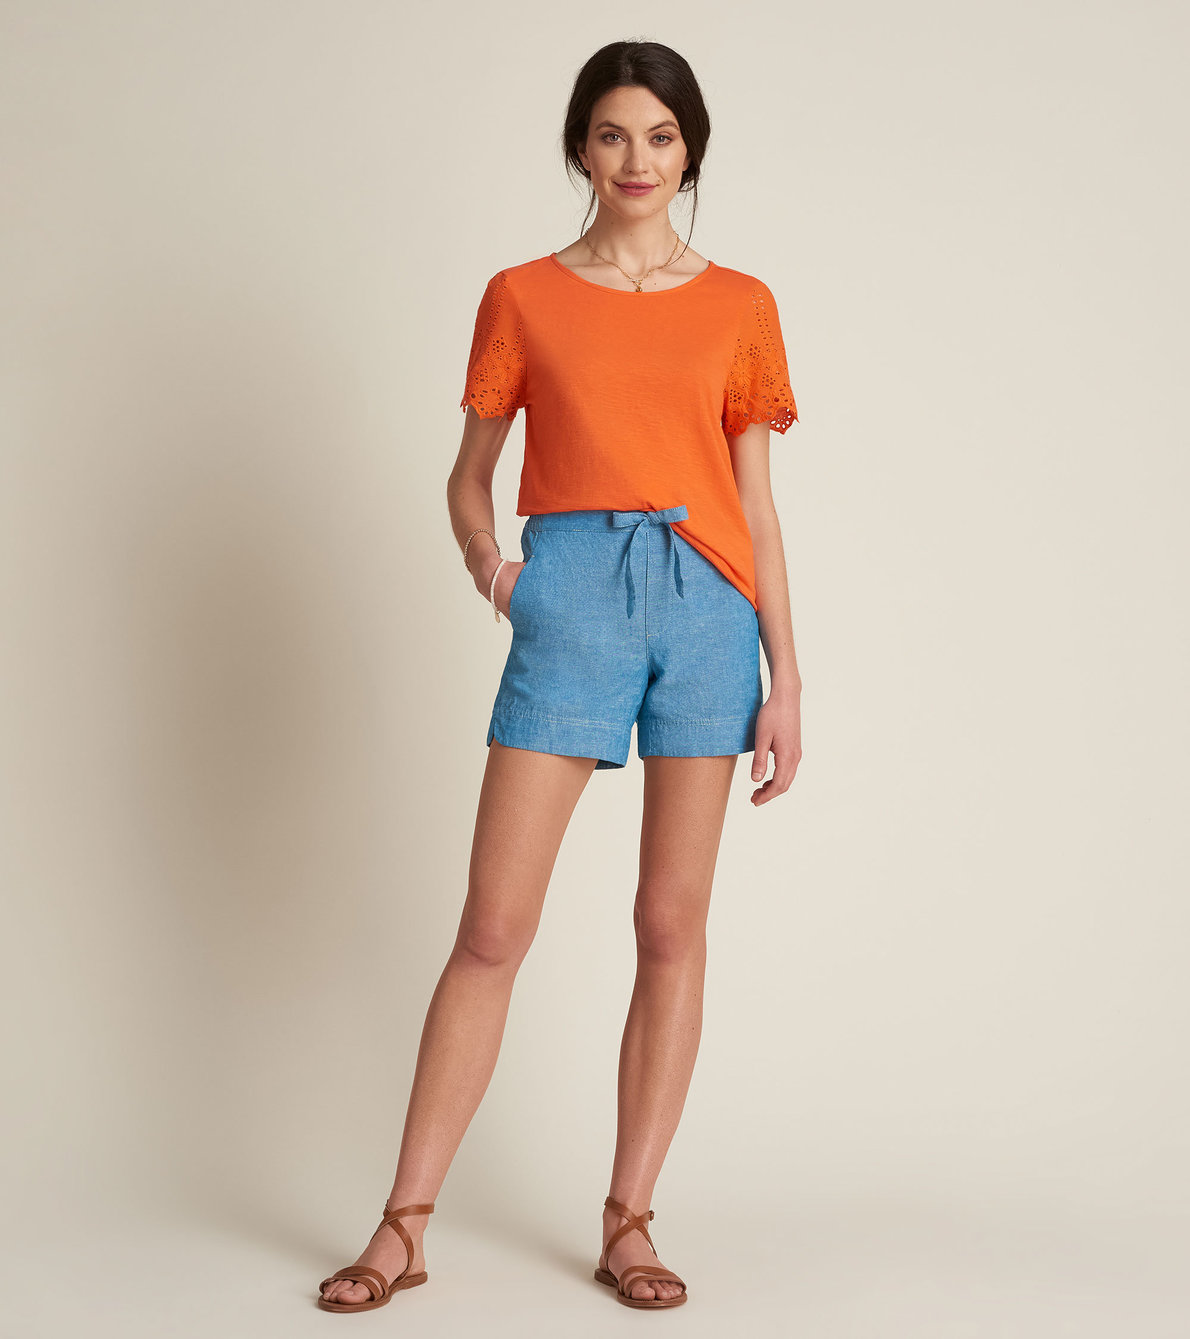 View larger image of Eyelet Tee - Hot Coral